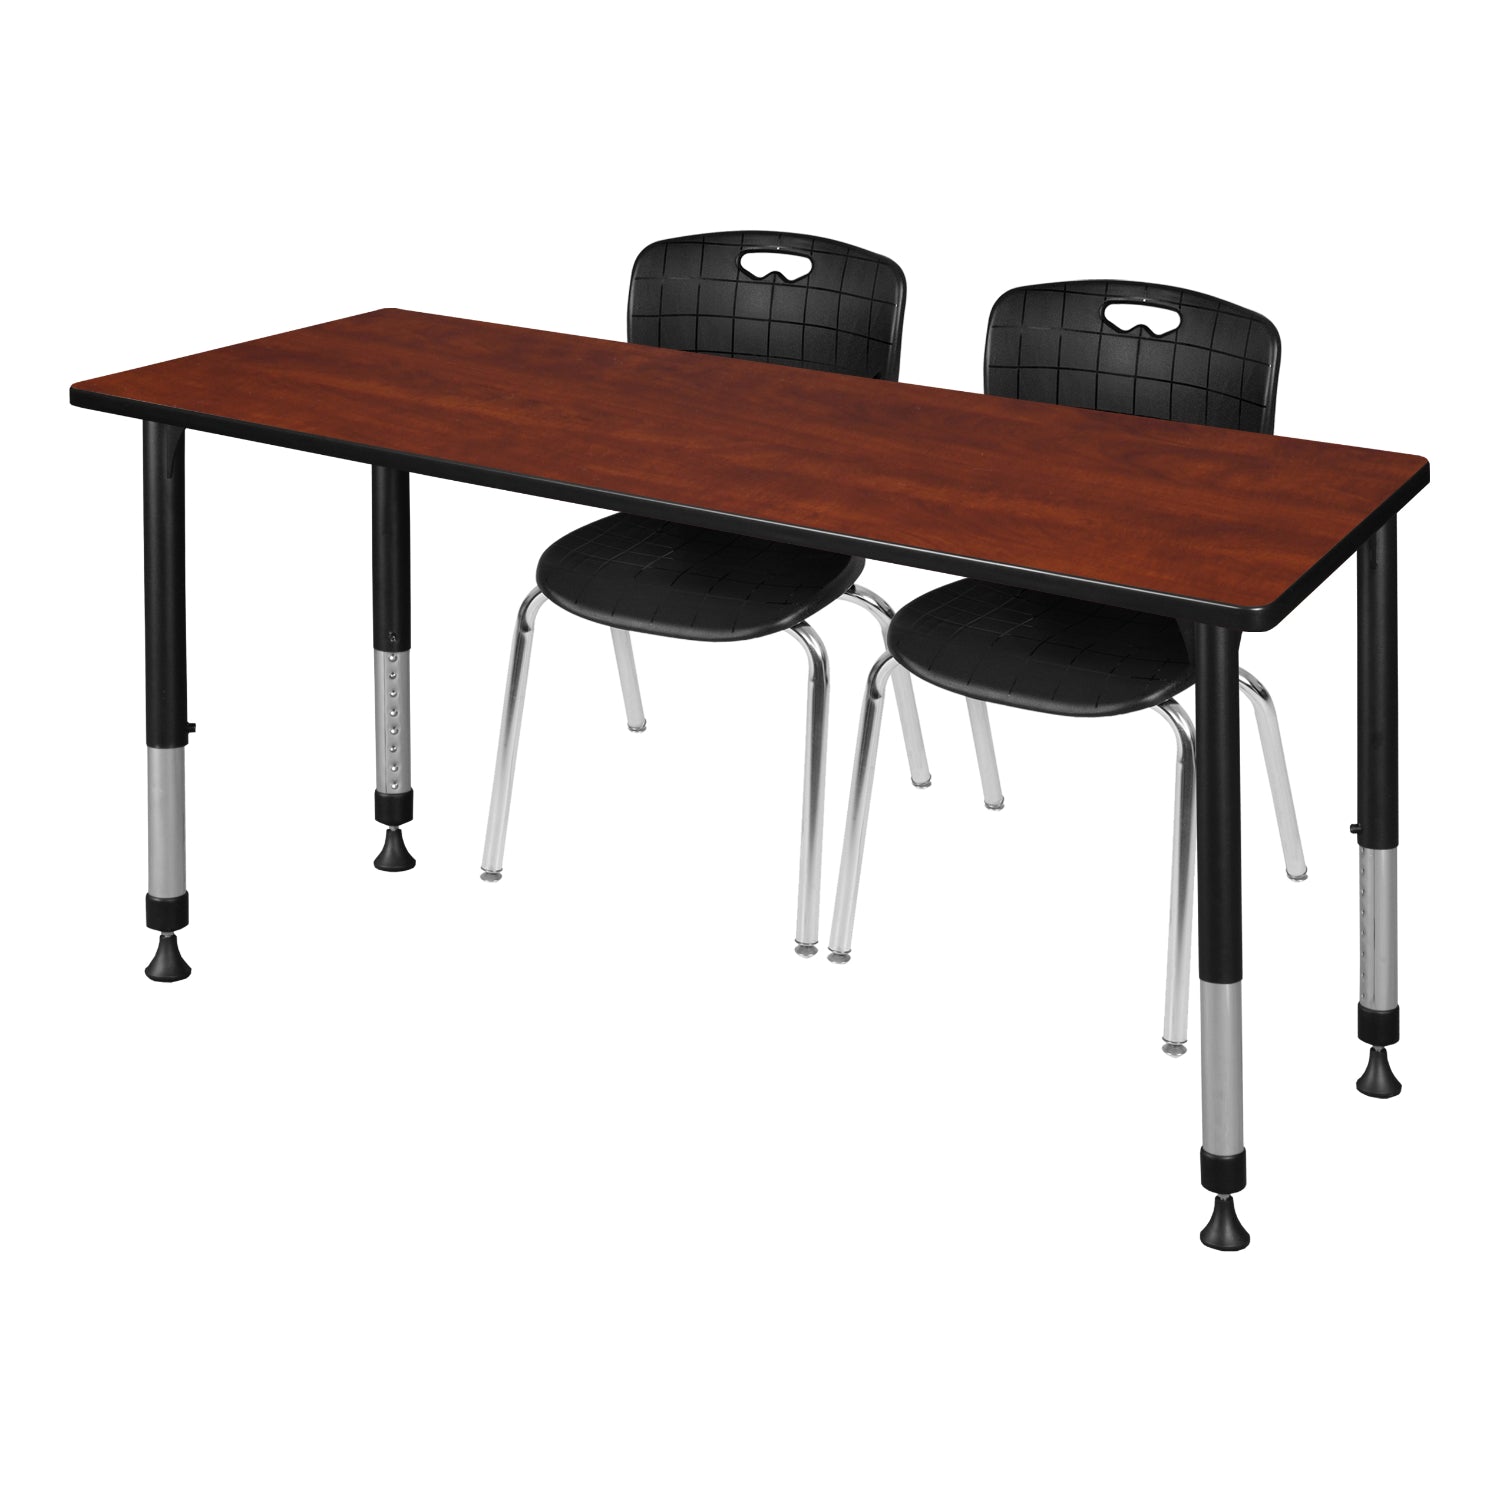 Kee Classroom Table and Chair Package, Kee 72" x 30" Rectangular Adjustable Height Table with 2 Andy 18" Stack Chairs